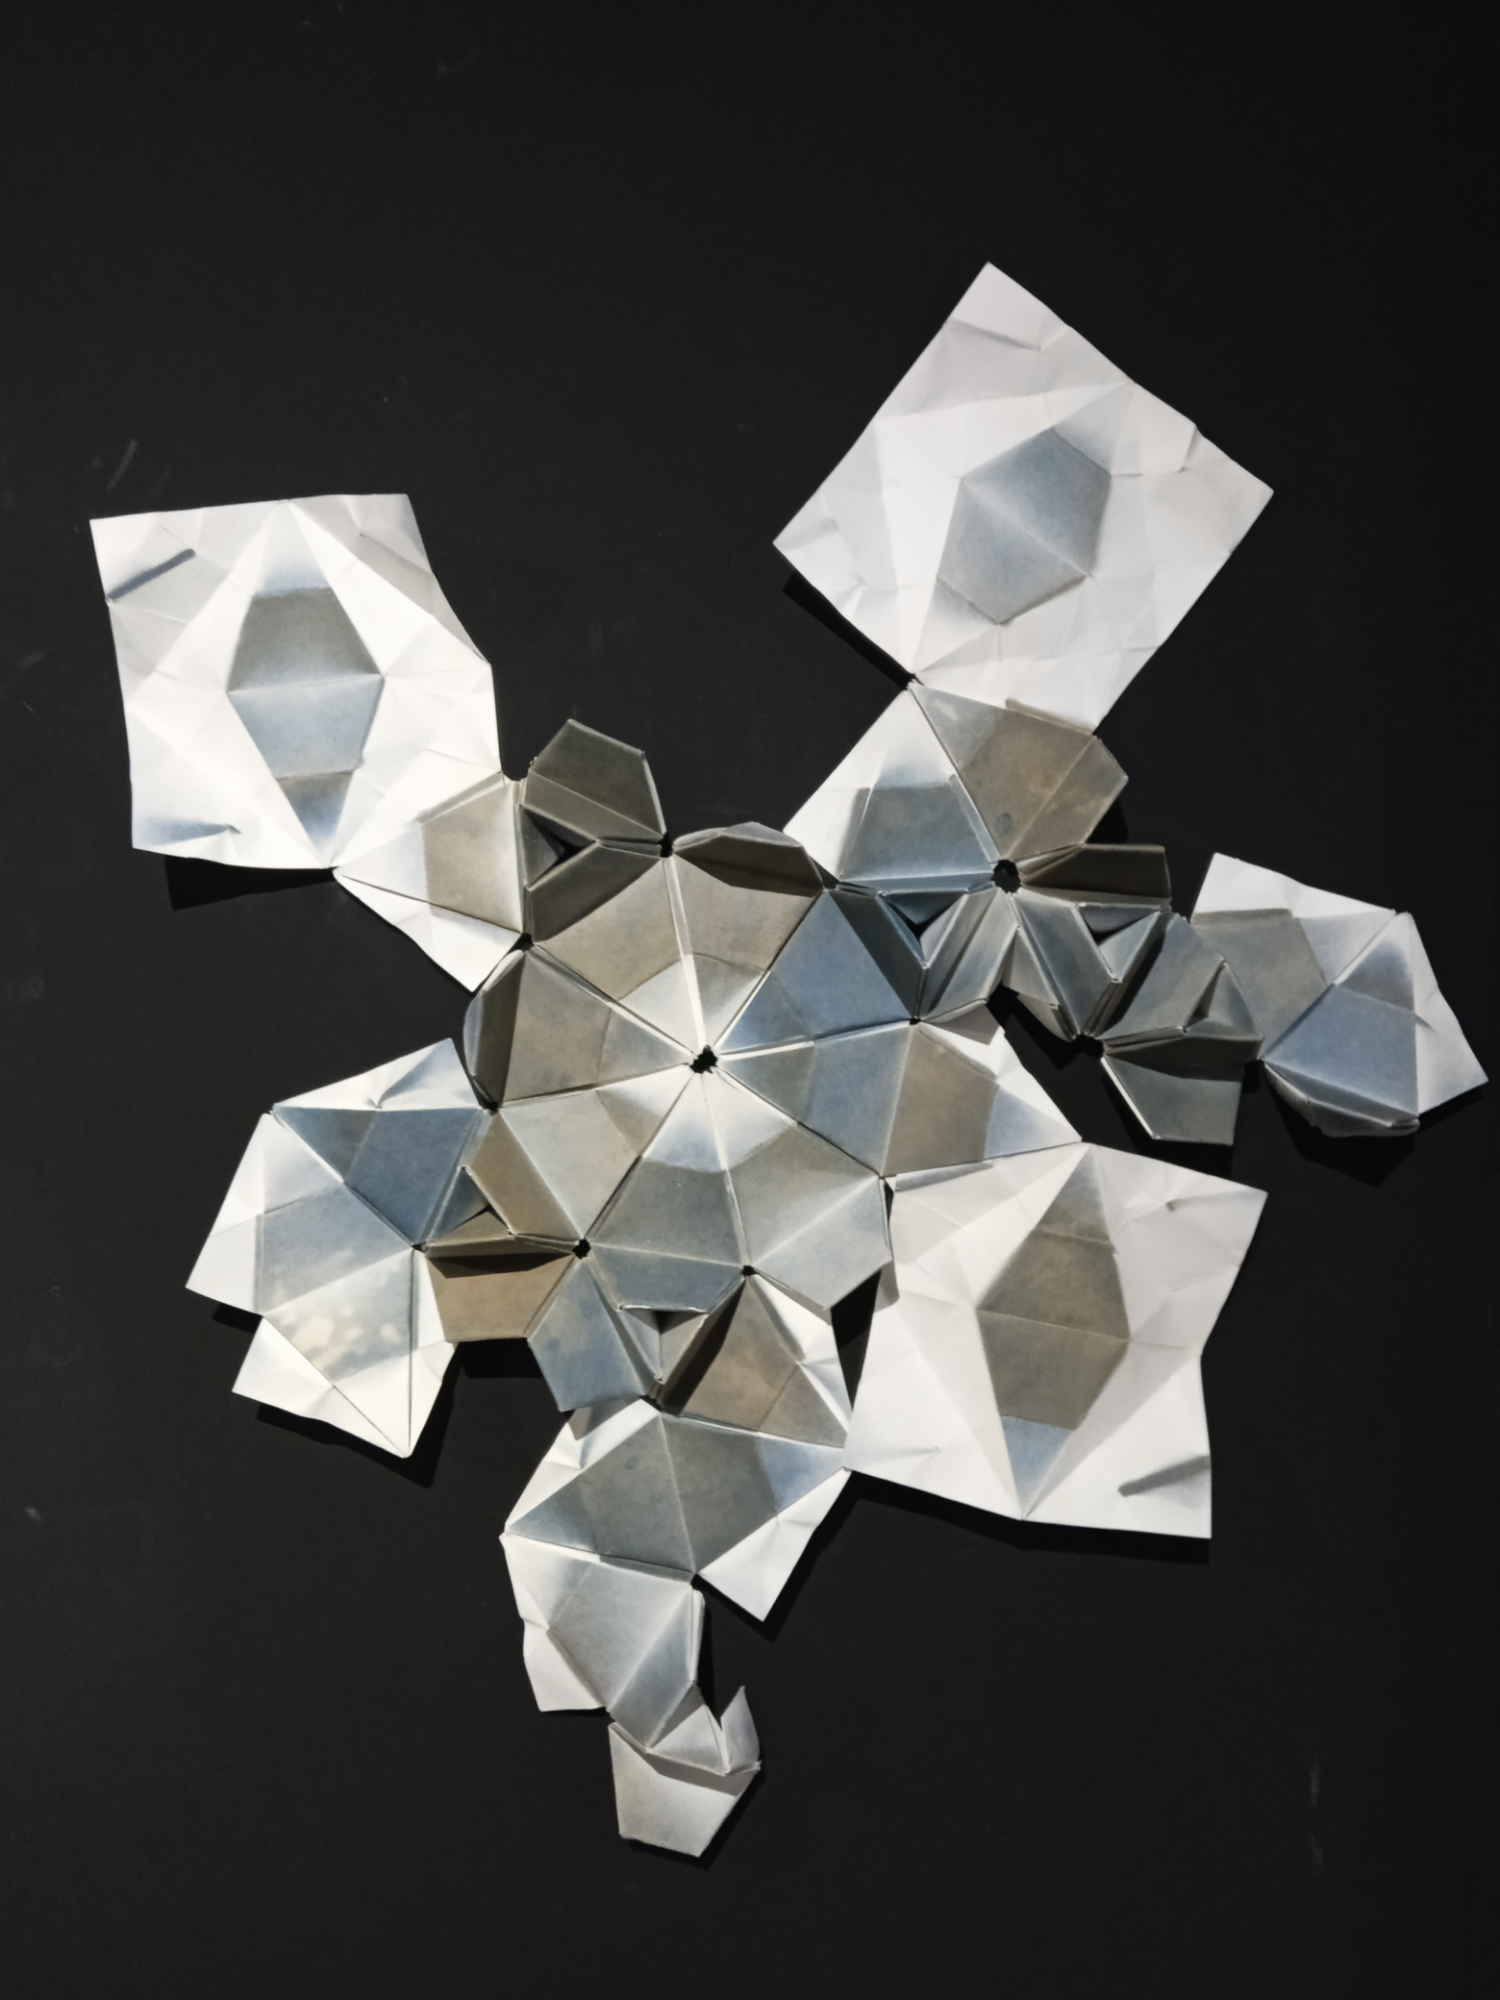 30 Memories of Porto; an origami sculpture with geometric forms printed onto 30 sheets of paper in shades of blue-gray and blue-green